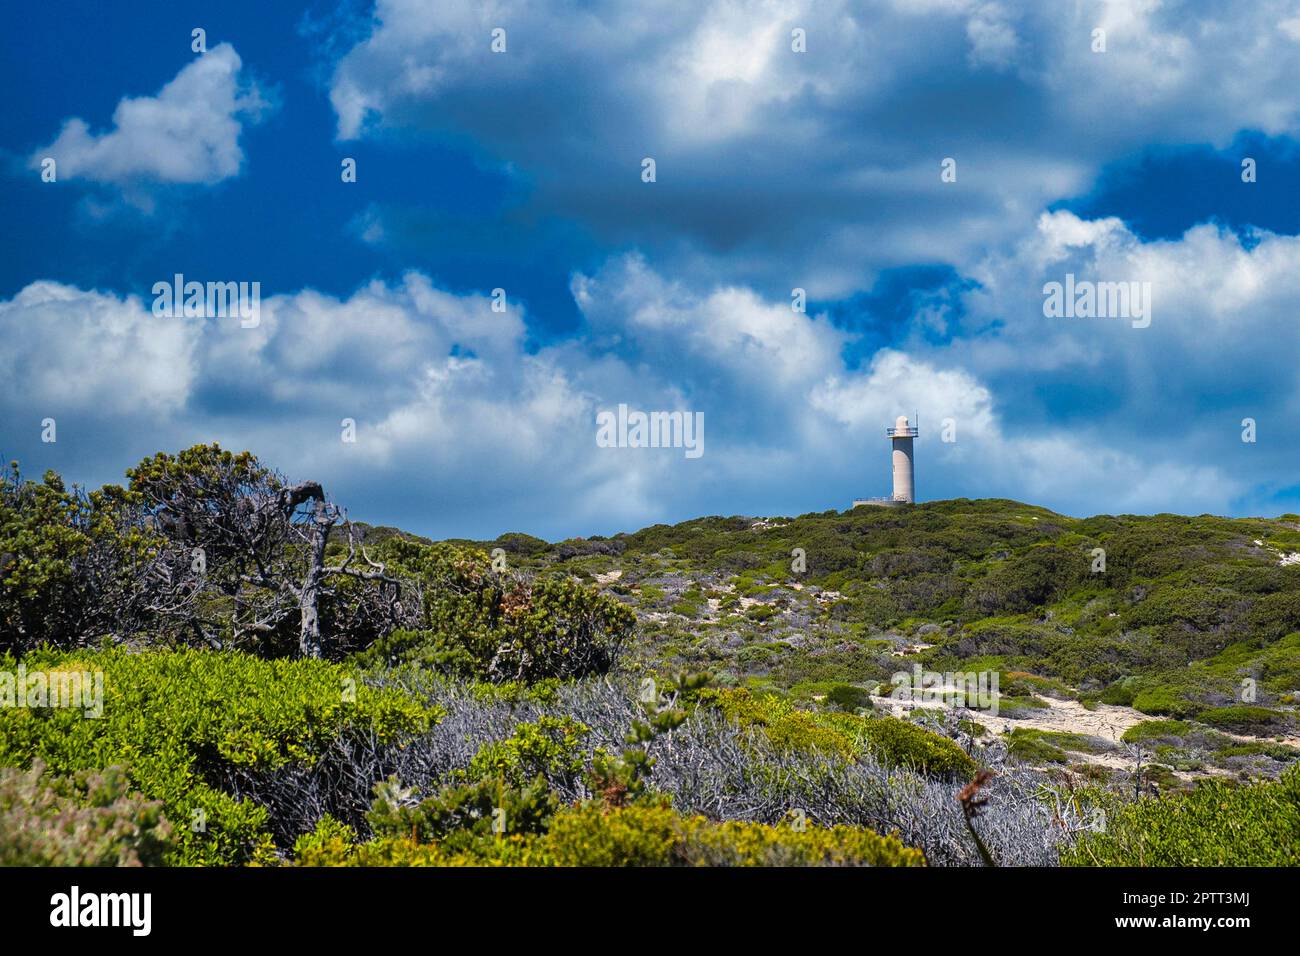 Coastal heathland vegetation and Cave Point Lighthouse in Torndirrup National park, Albany, Western Australia, under a cloudy sky Stock Photo